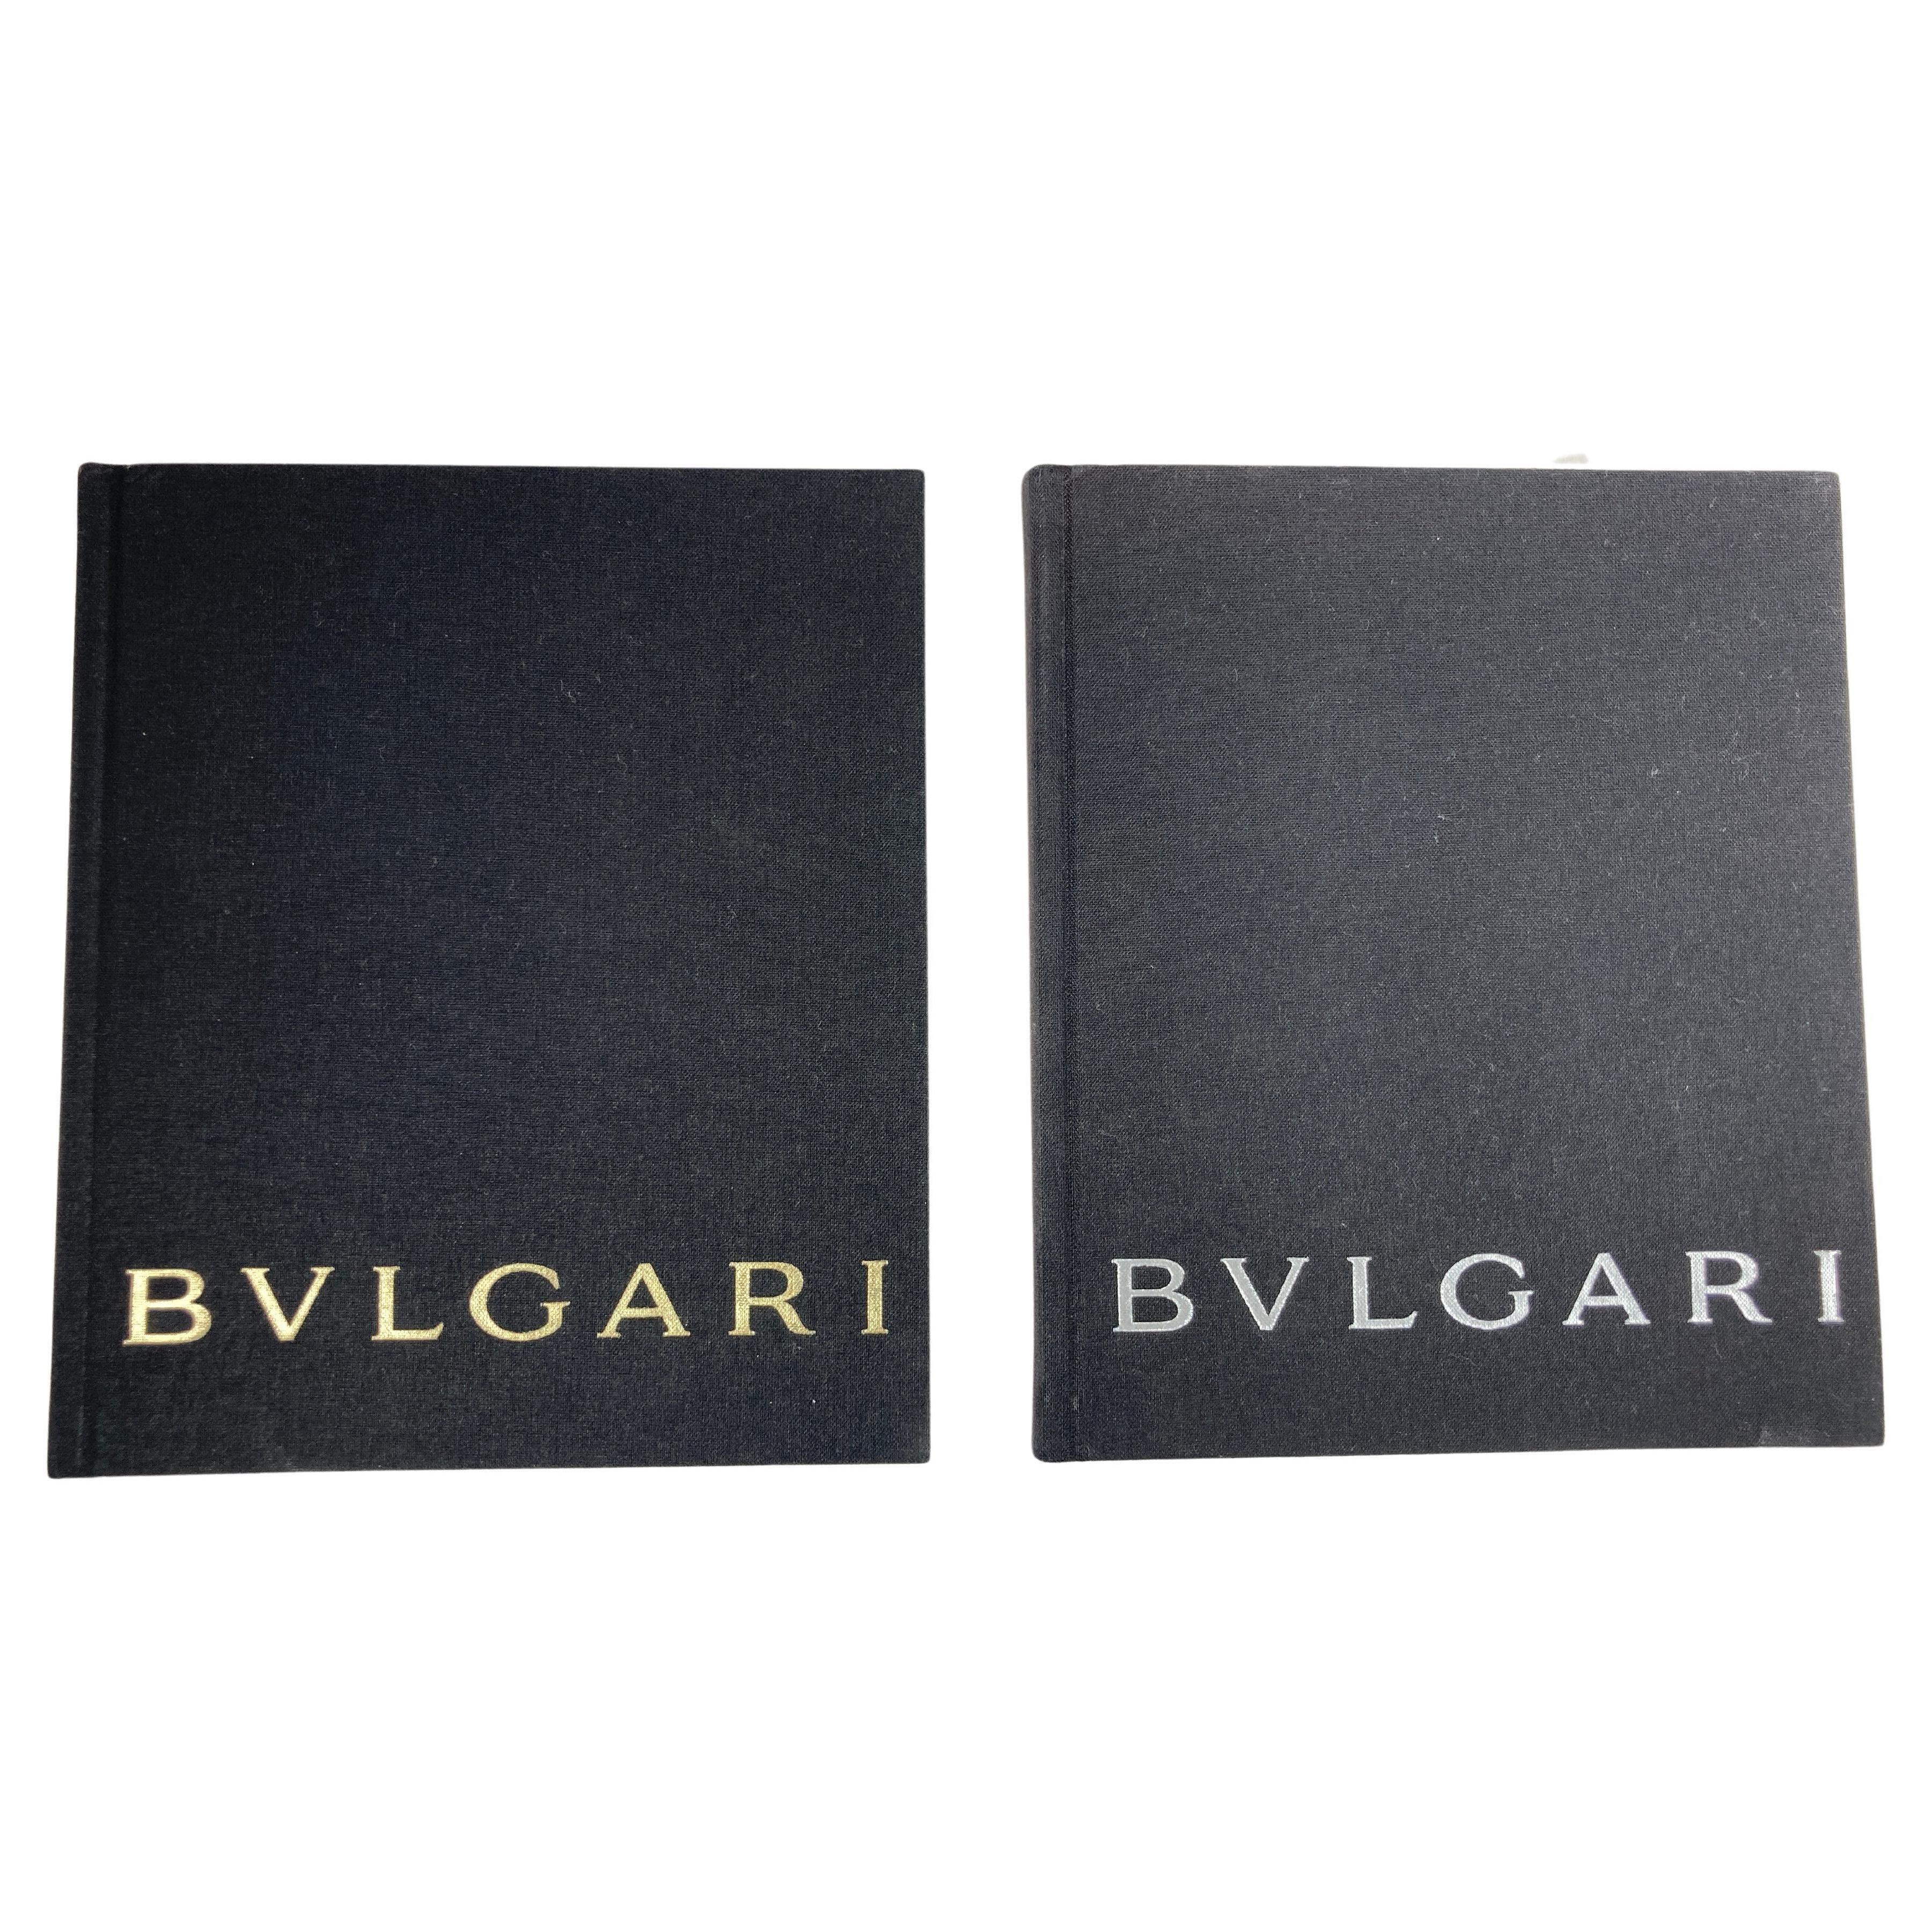 Set of Two Bvlgari Brand Book Catalogue Jewellery and Watches 2013